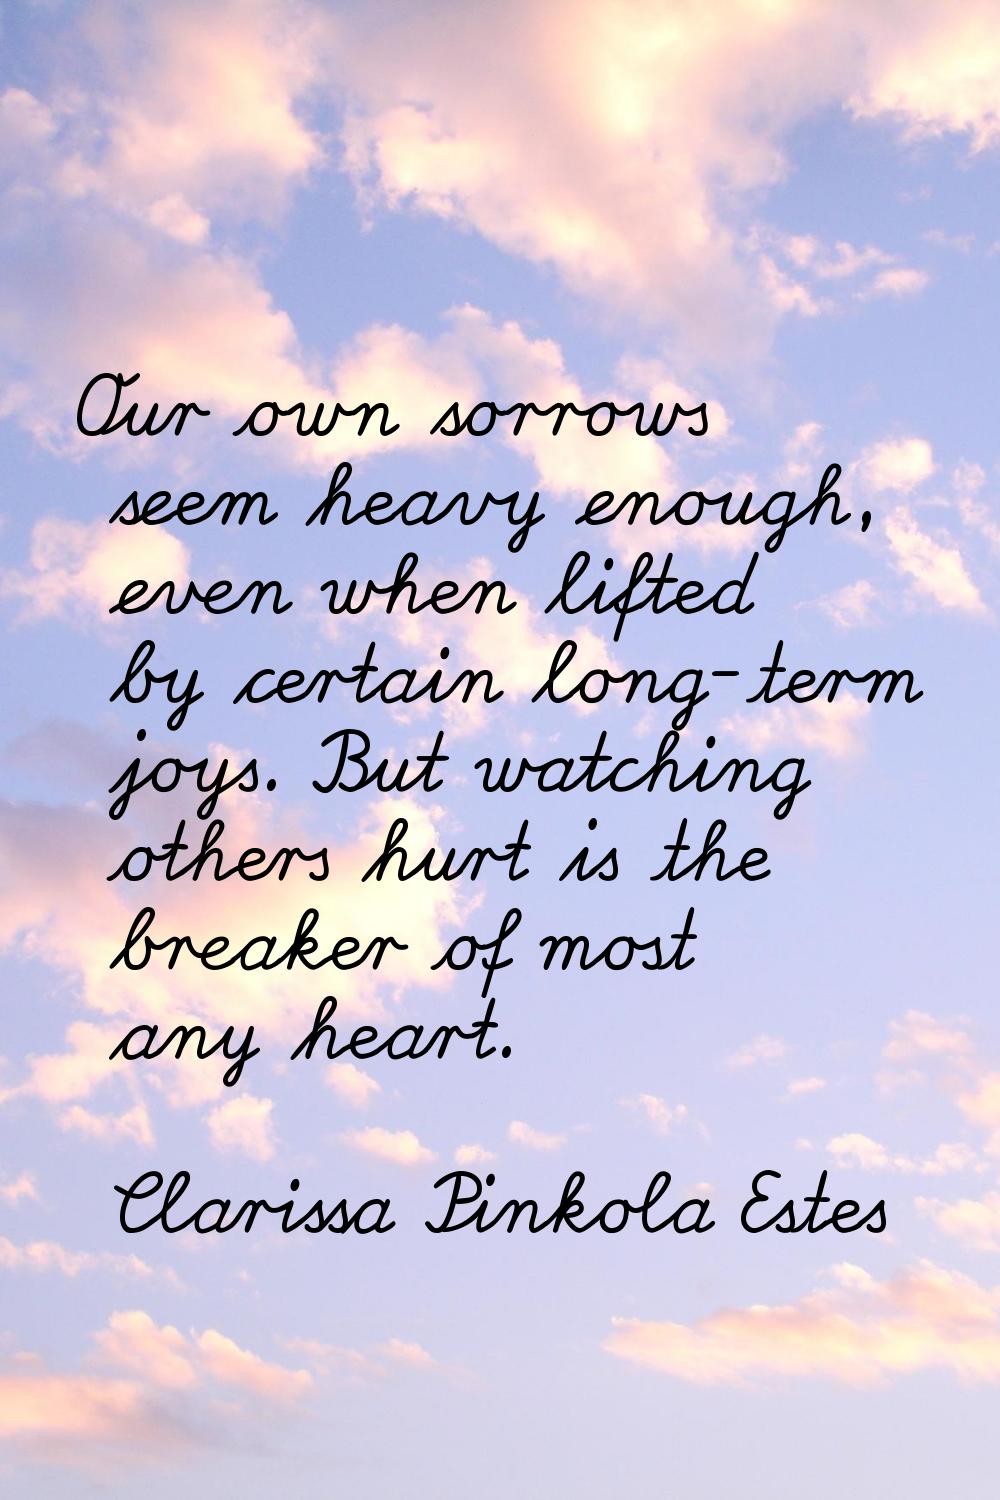 Our own sorrows seem heavy enough, even when lifted by certain long-term joys. But watching others 